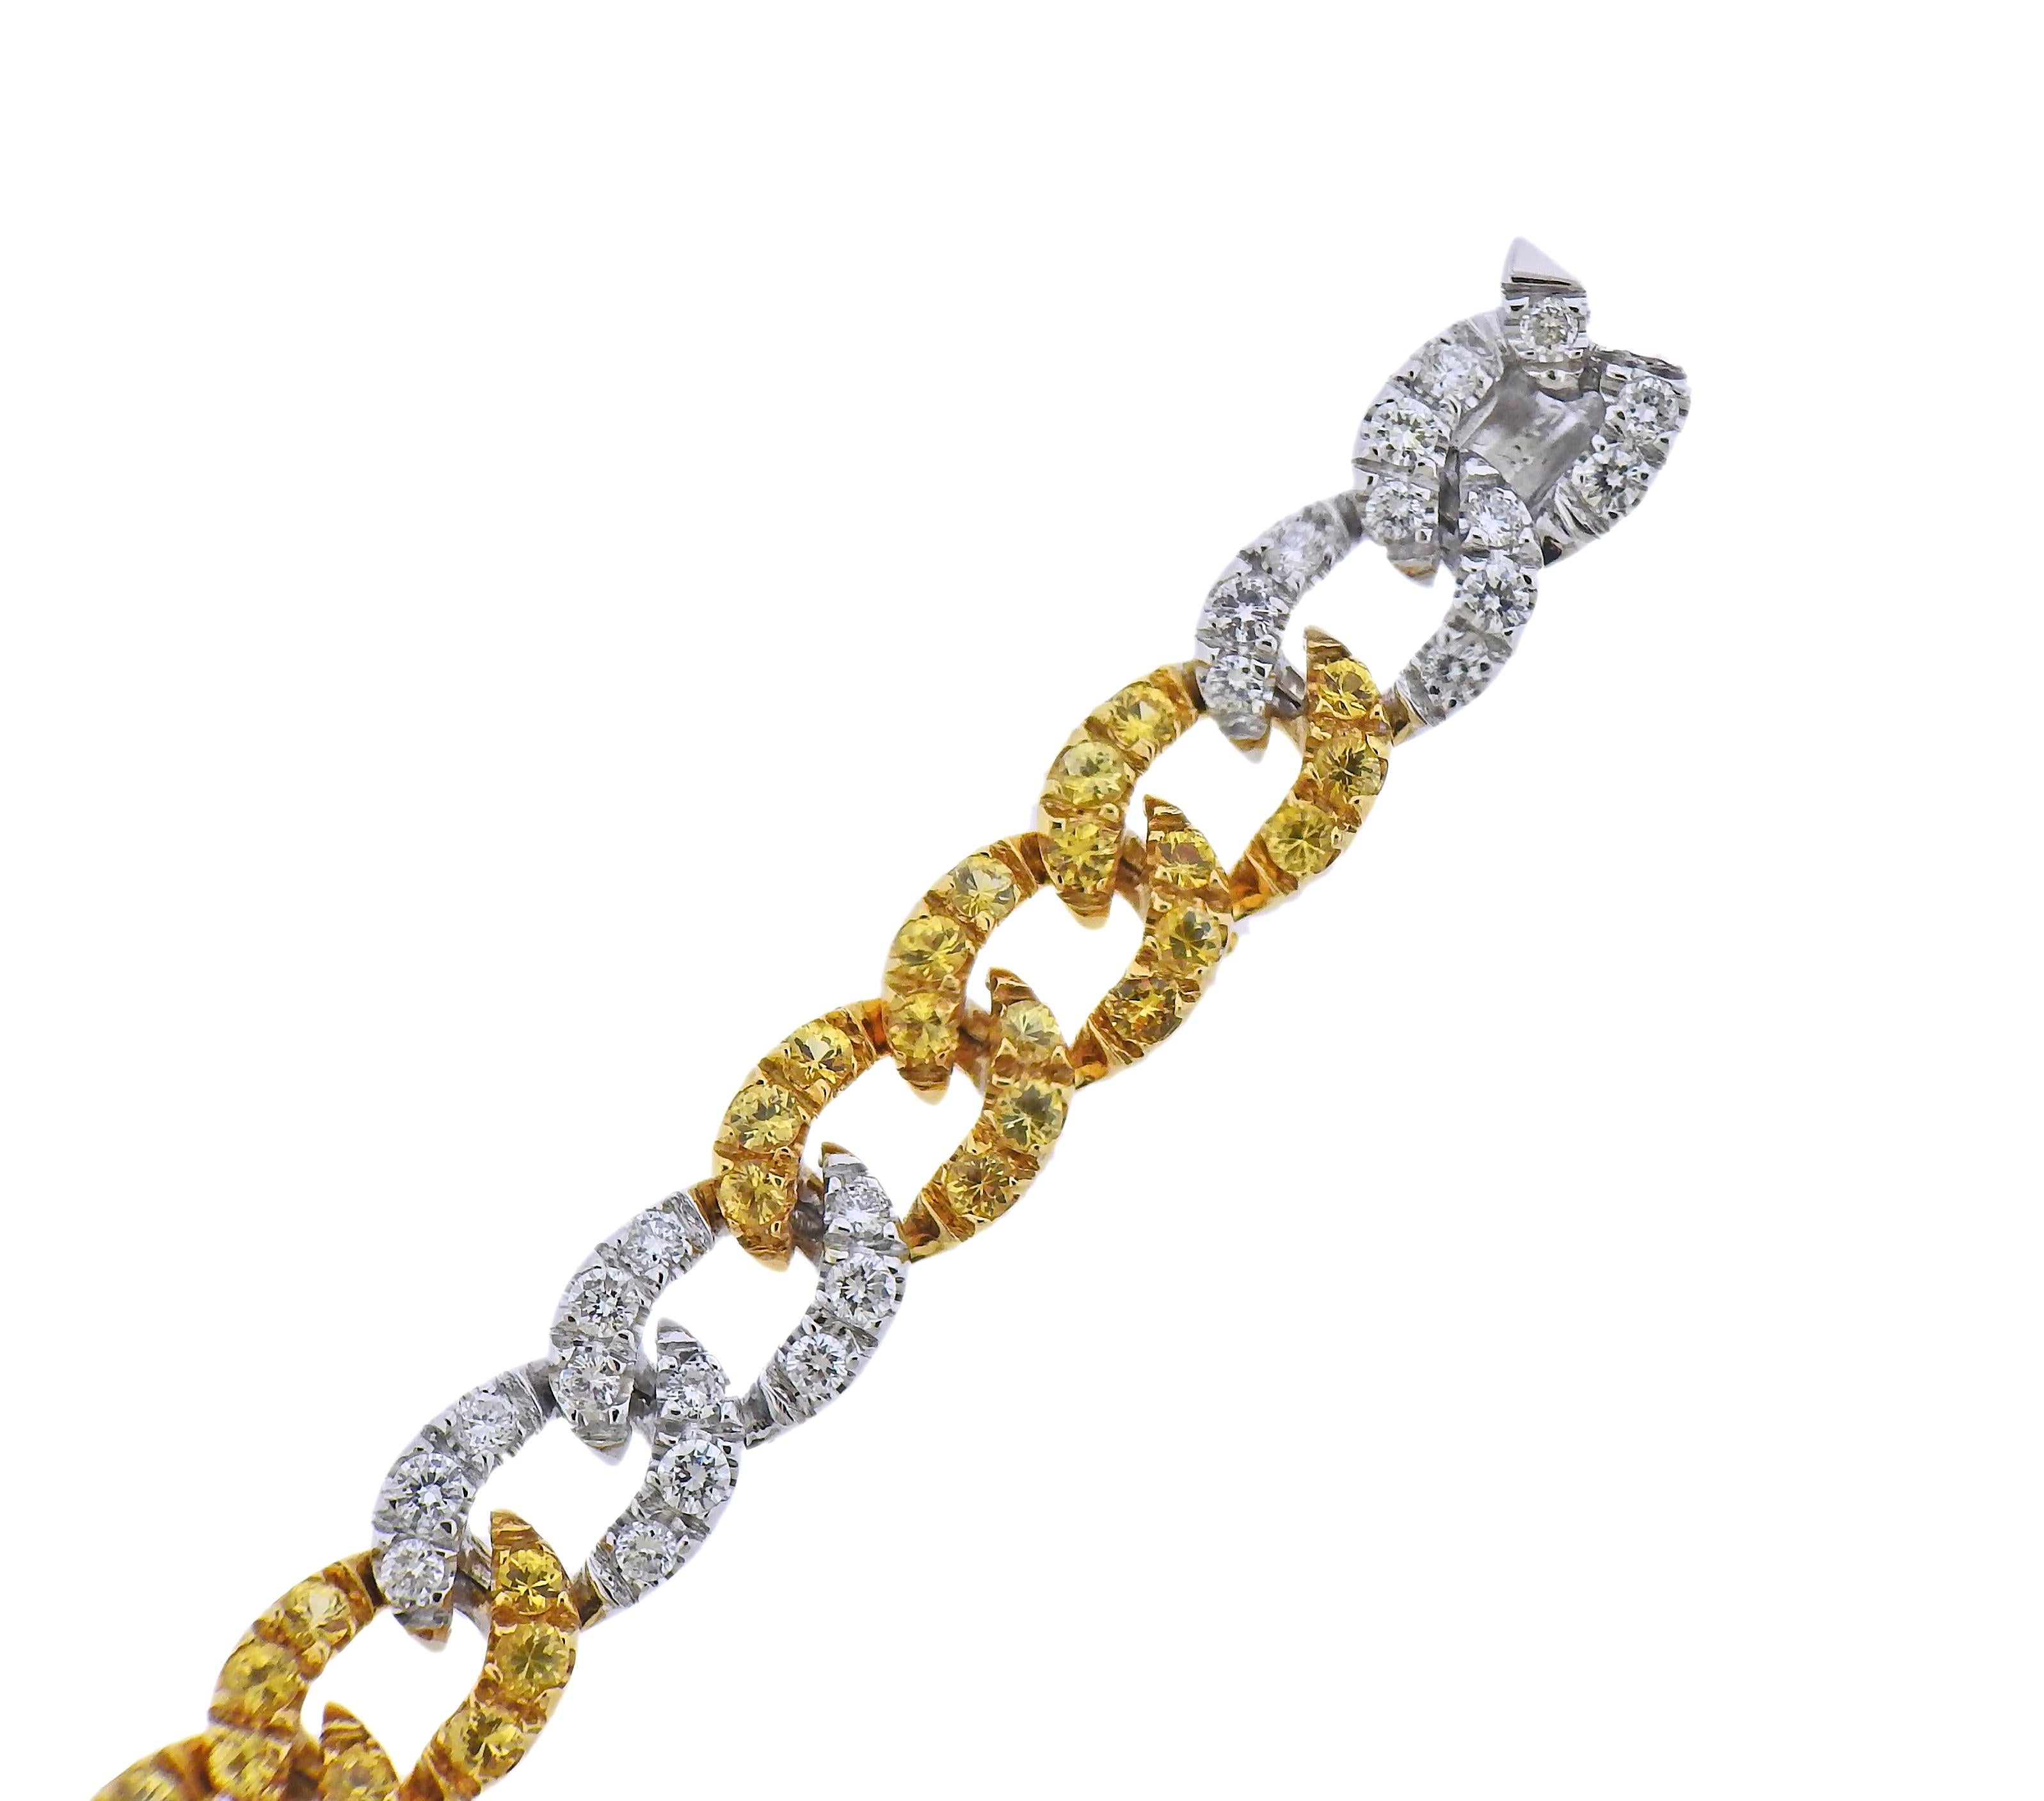 18k gold curb link bracelet signed by Curnis, with yellow sapphires and approx. 2.50ctw in diamonds. Bracelet is 6 7/8